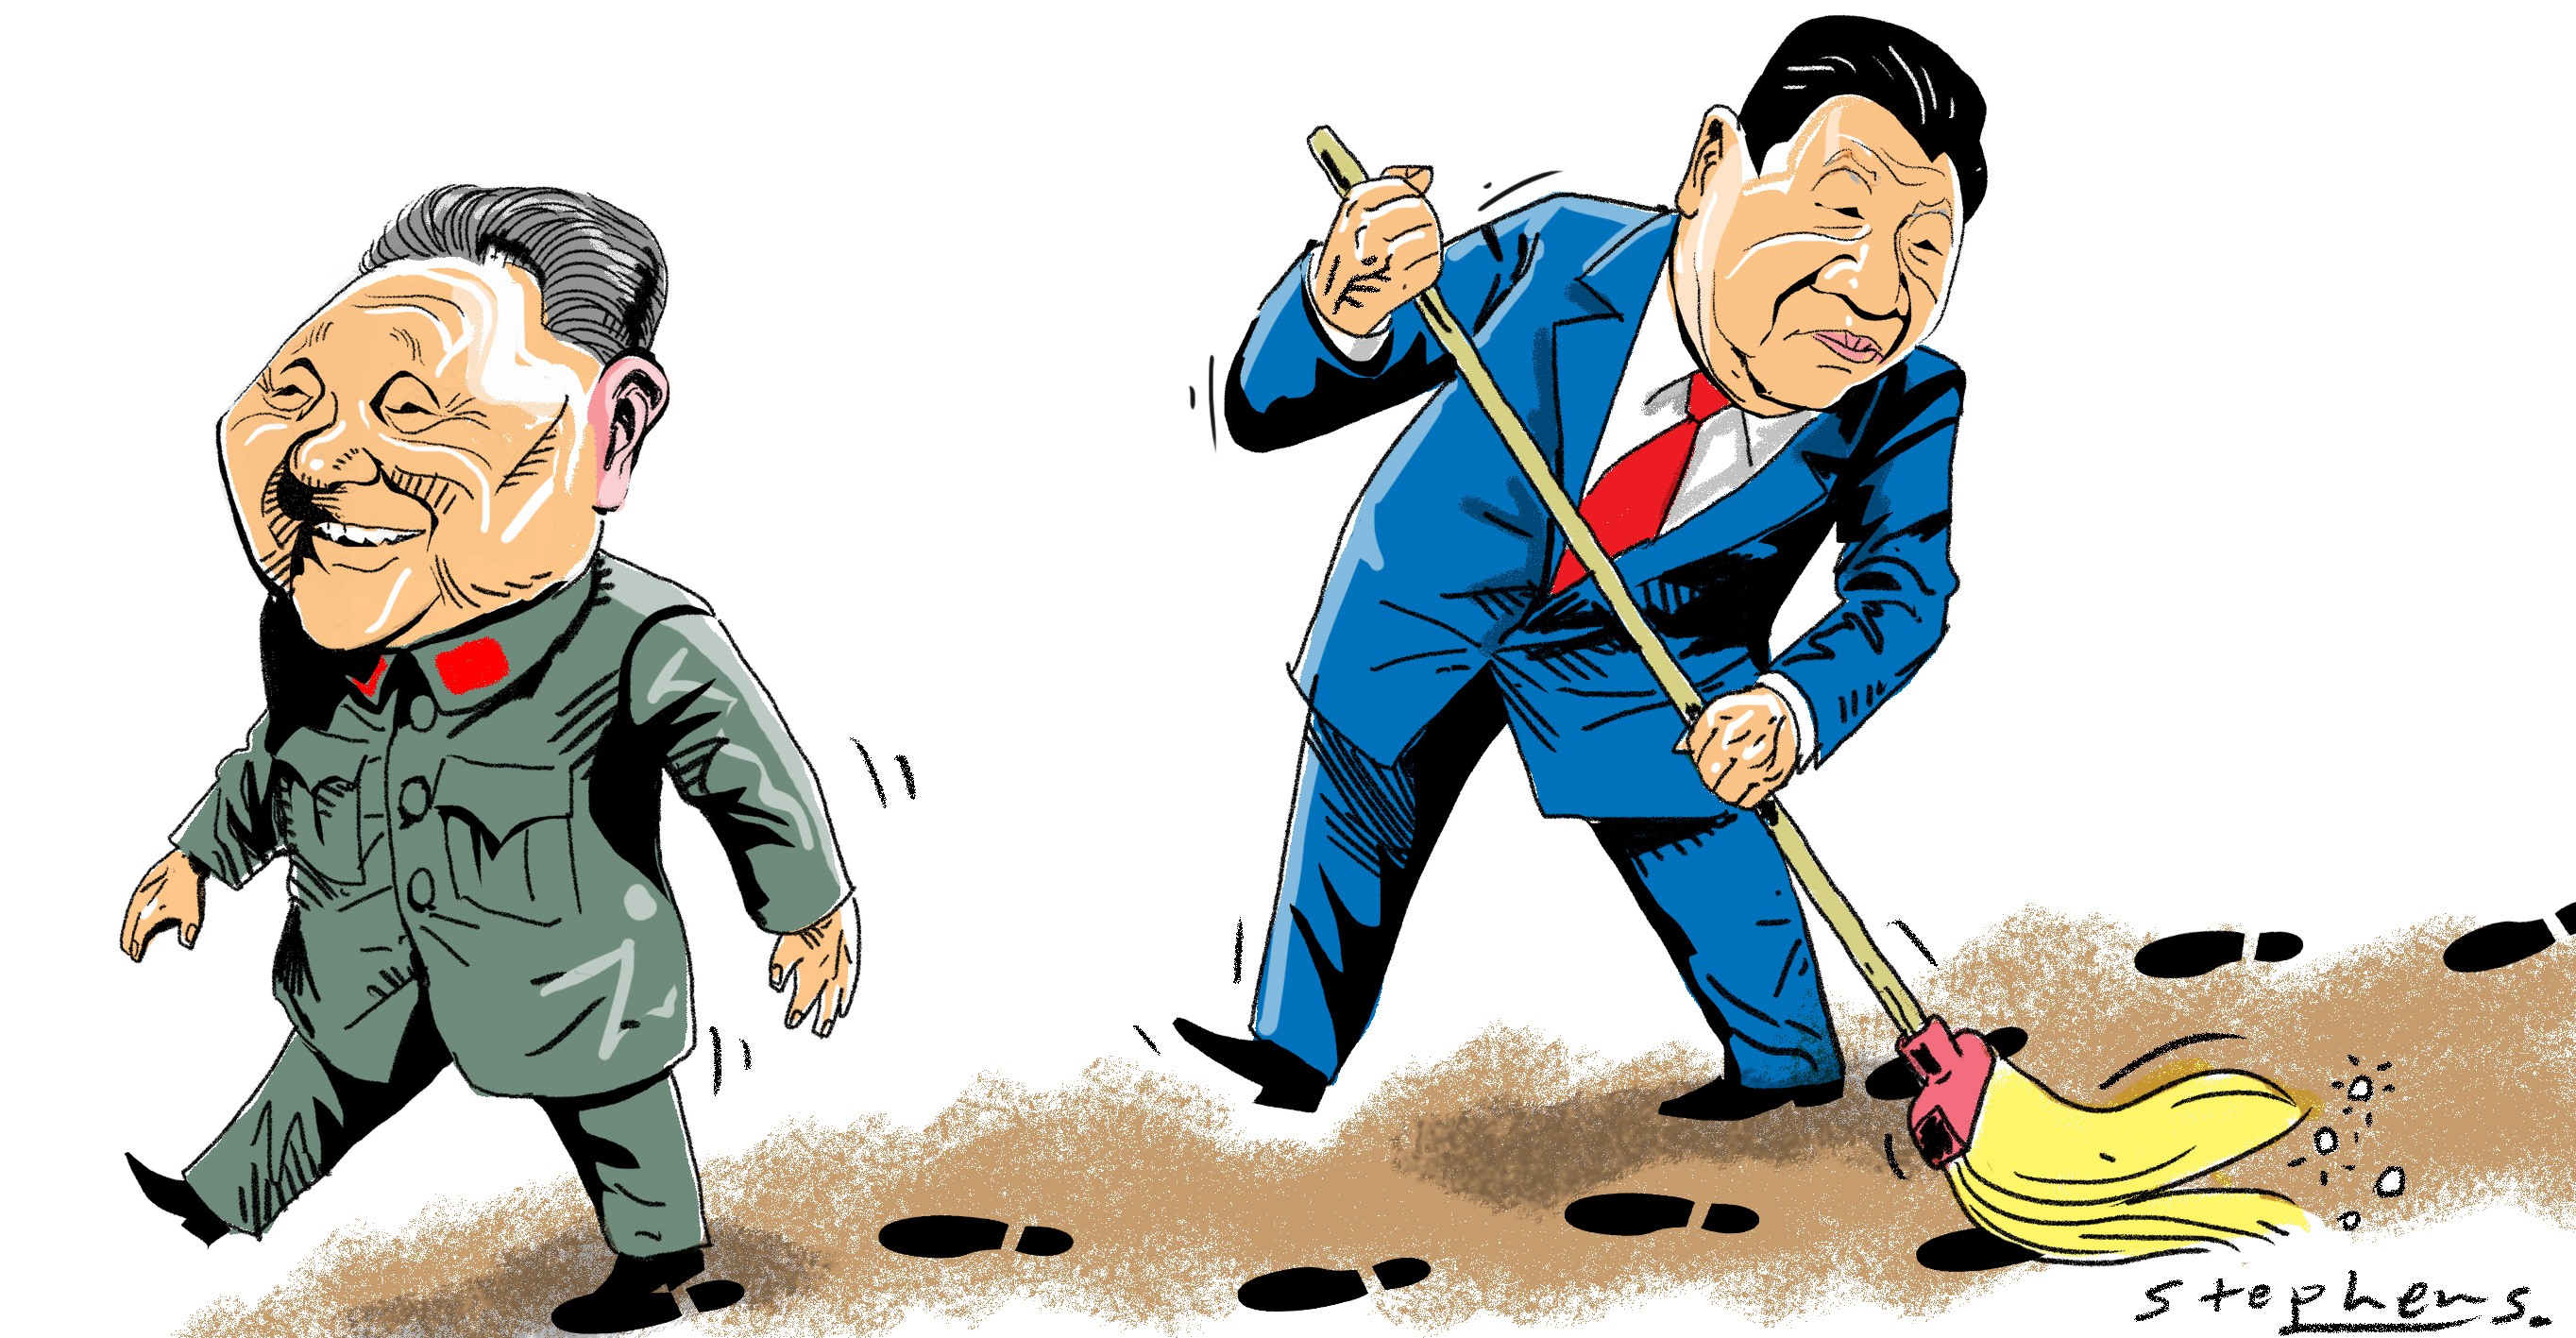 Is Deng’s system finished and is collective leadership a pipe dream? In part, both are being suspended, at least at the highest levels. Illustration: Craig Stephens